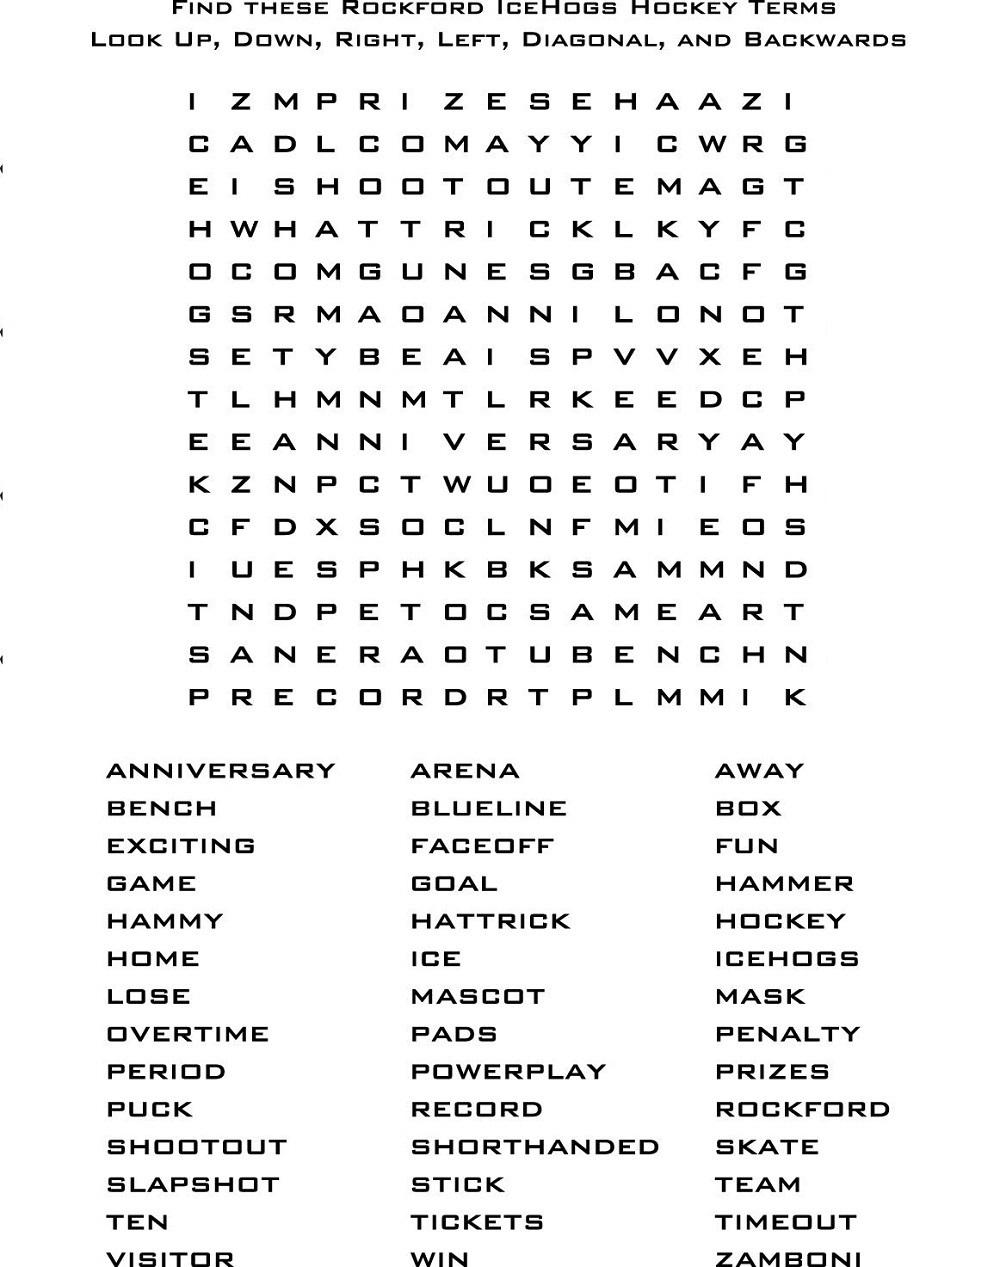 Printable Word Searches For Adults Word Search Printable